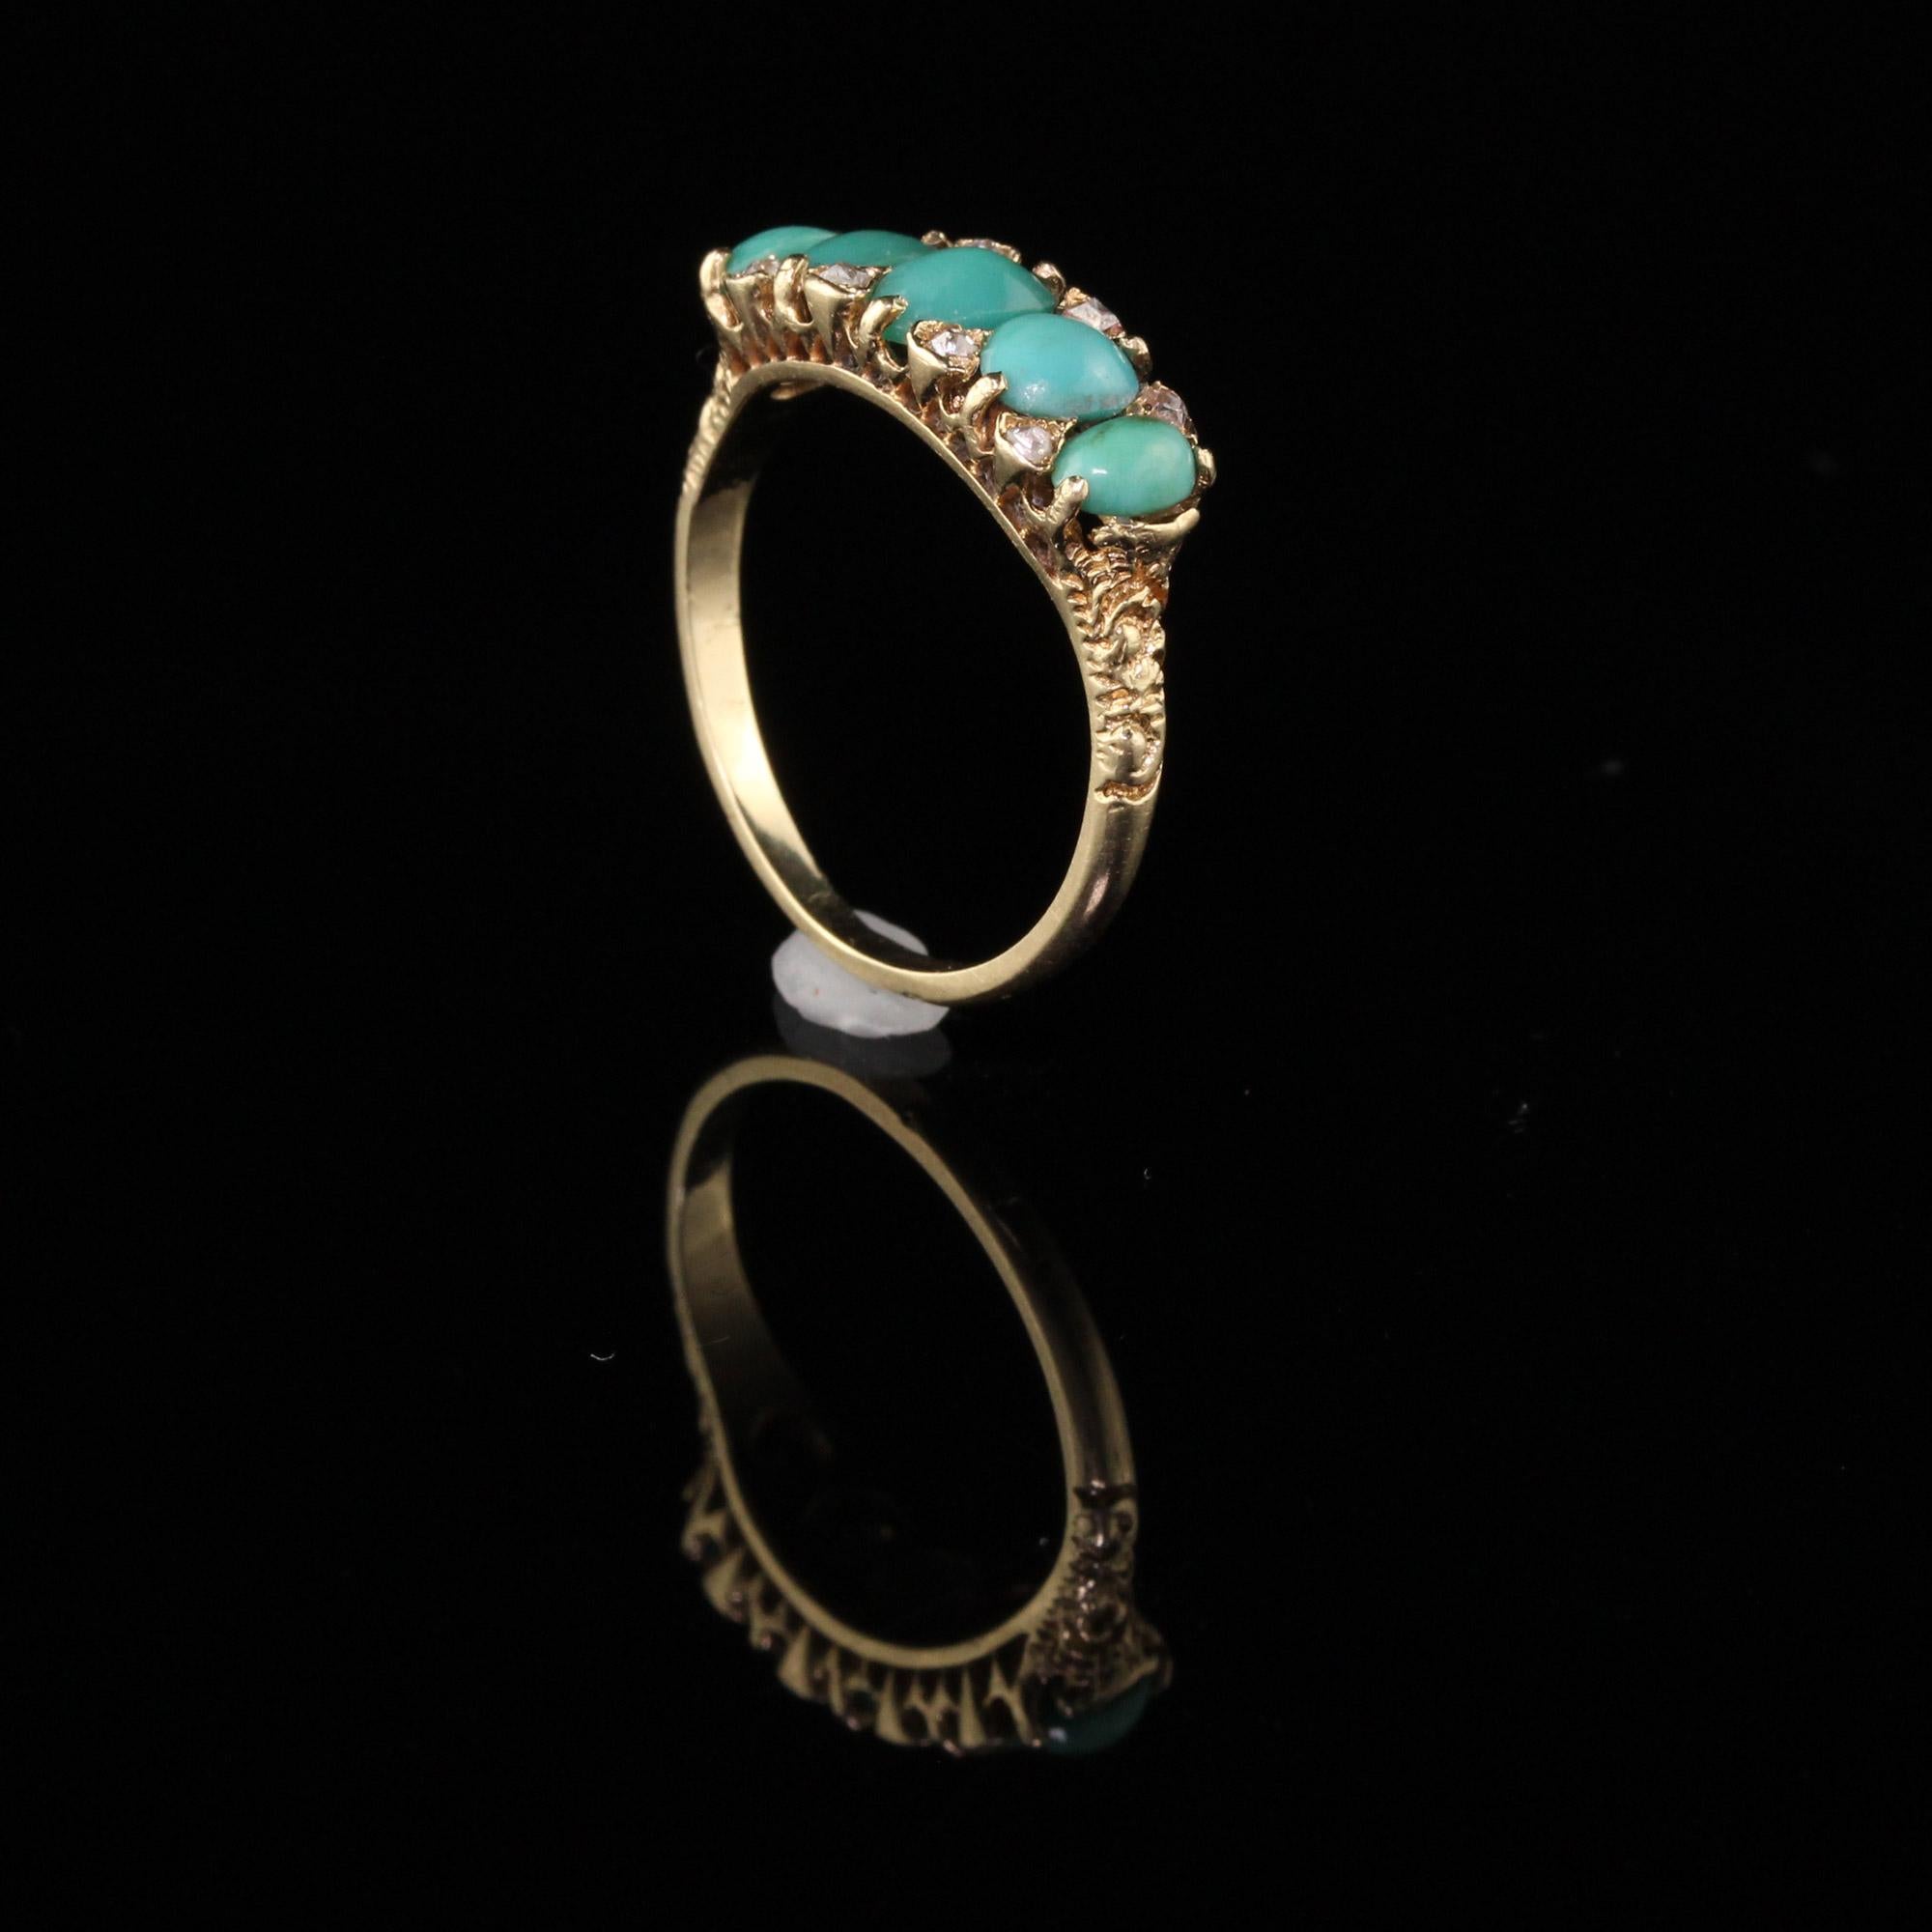 Antique Victorian 14 Karat Yellow Gold Diamond and Turquoise Ring 1